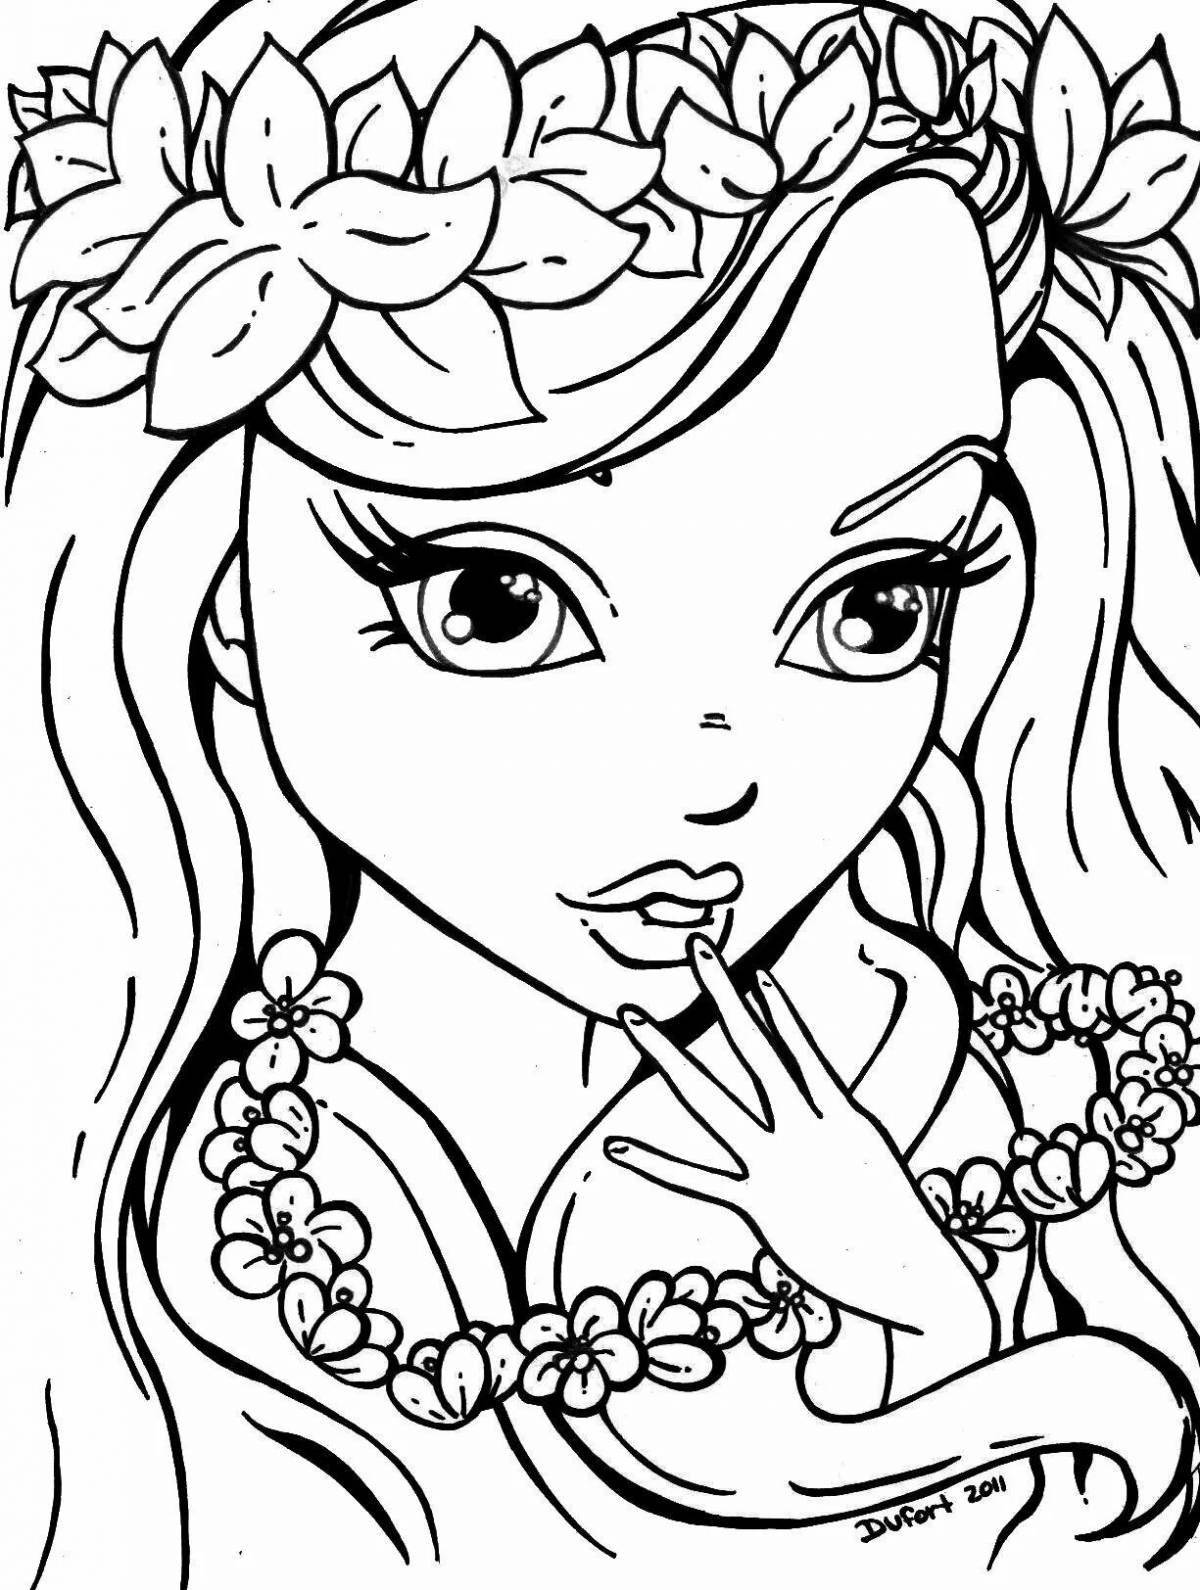 Adorable coloring book for girls 9-12 years old